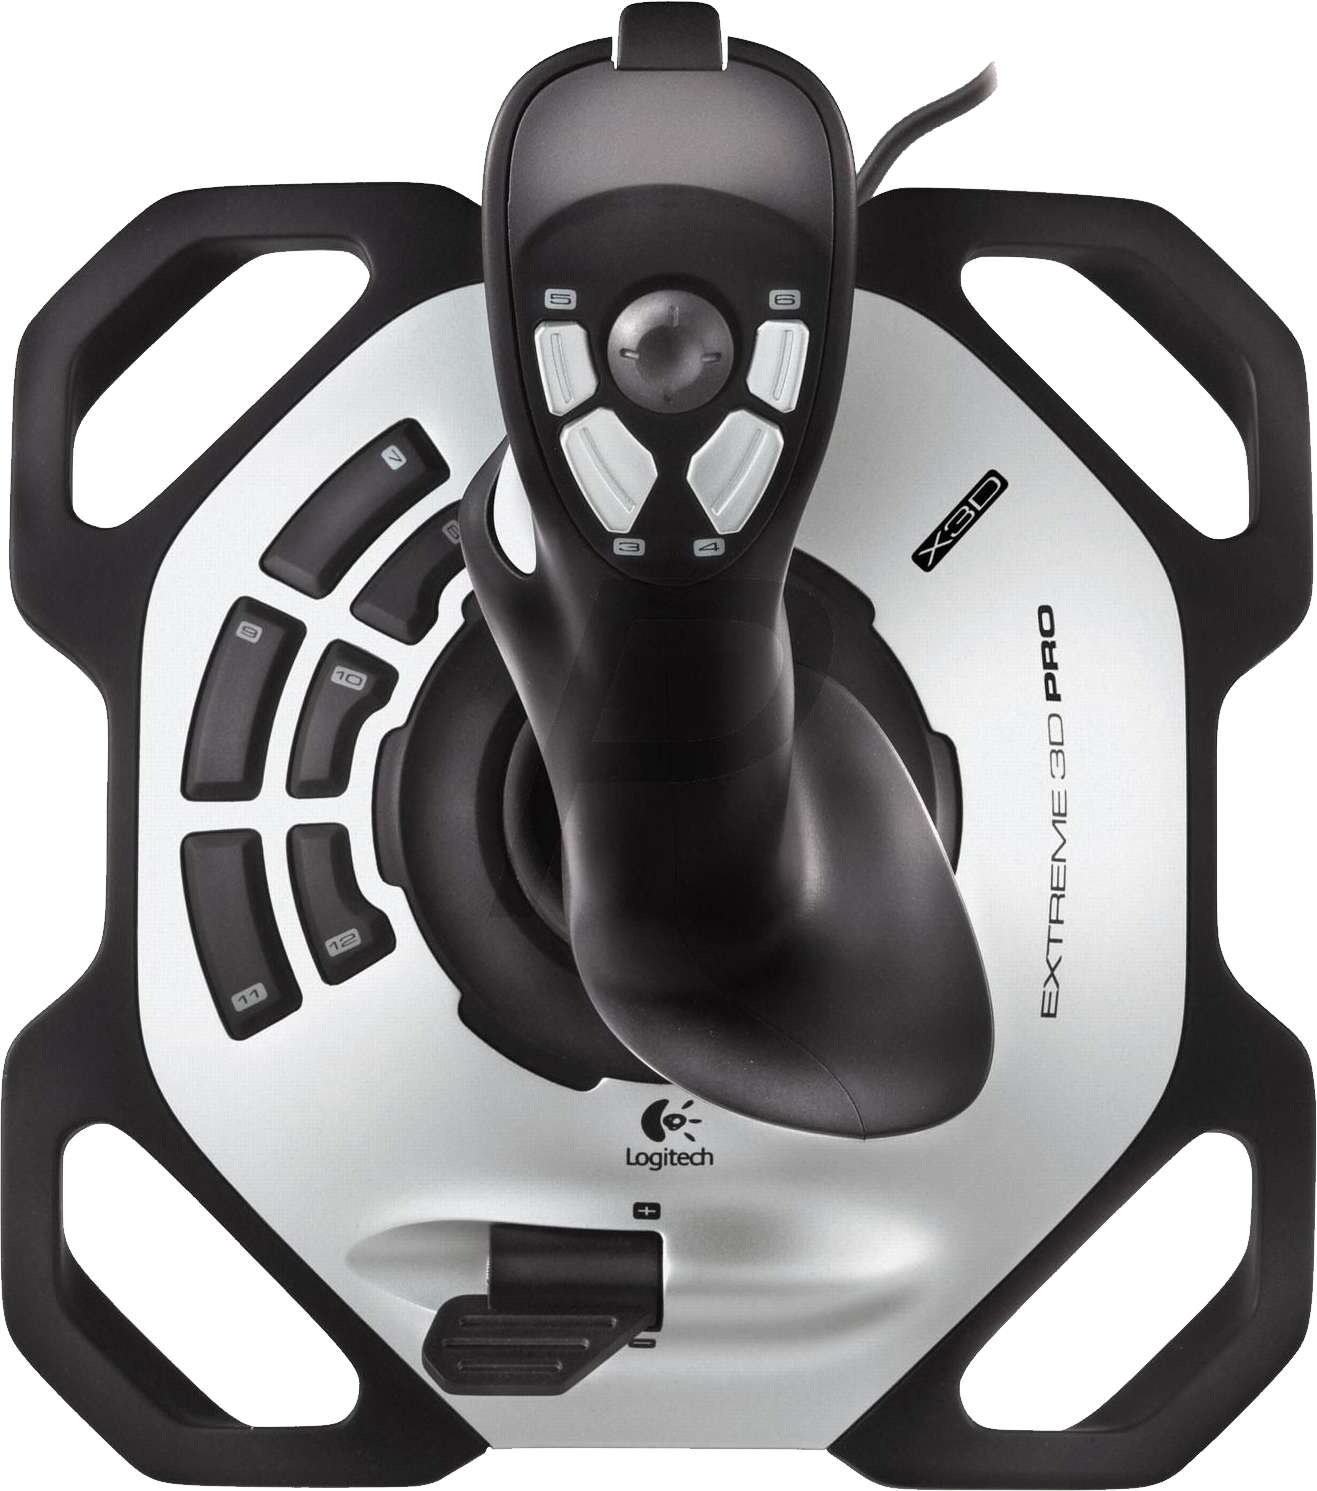 Black and Silver Joystick Topview PNG Image